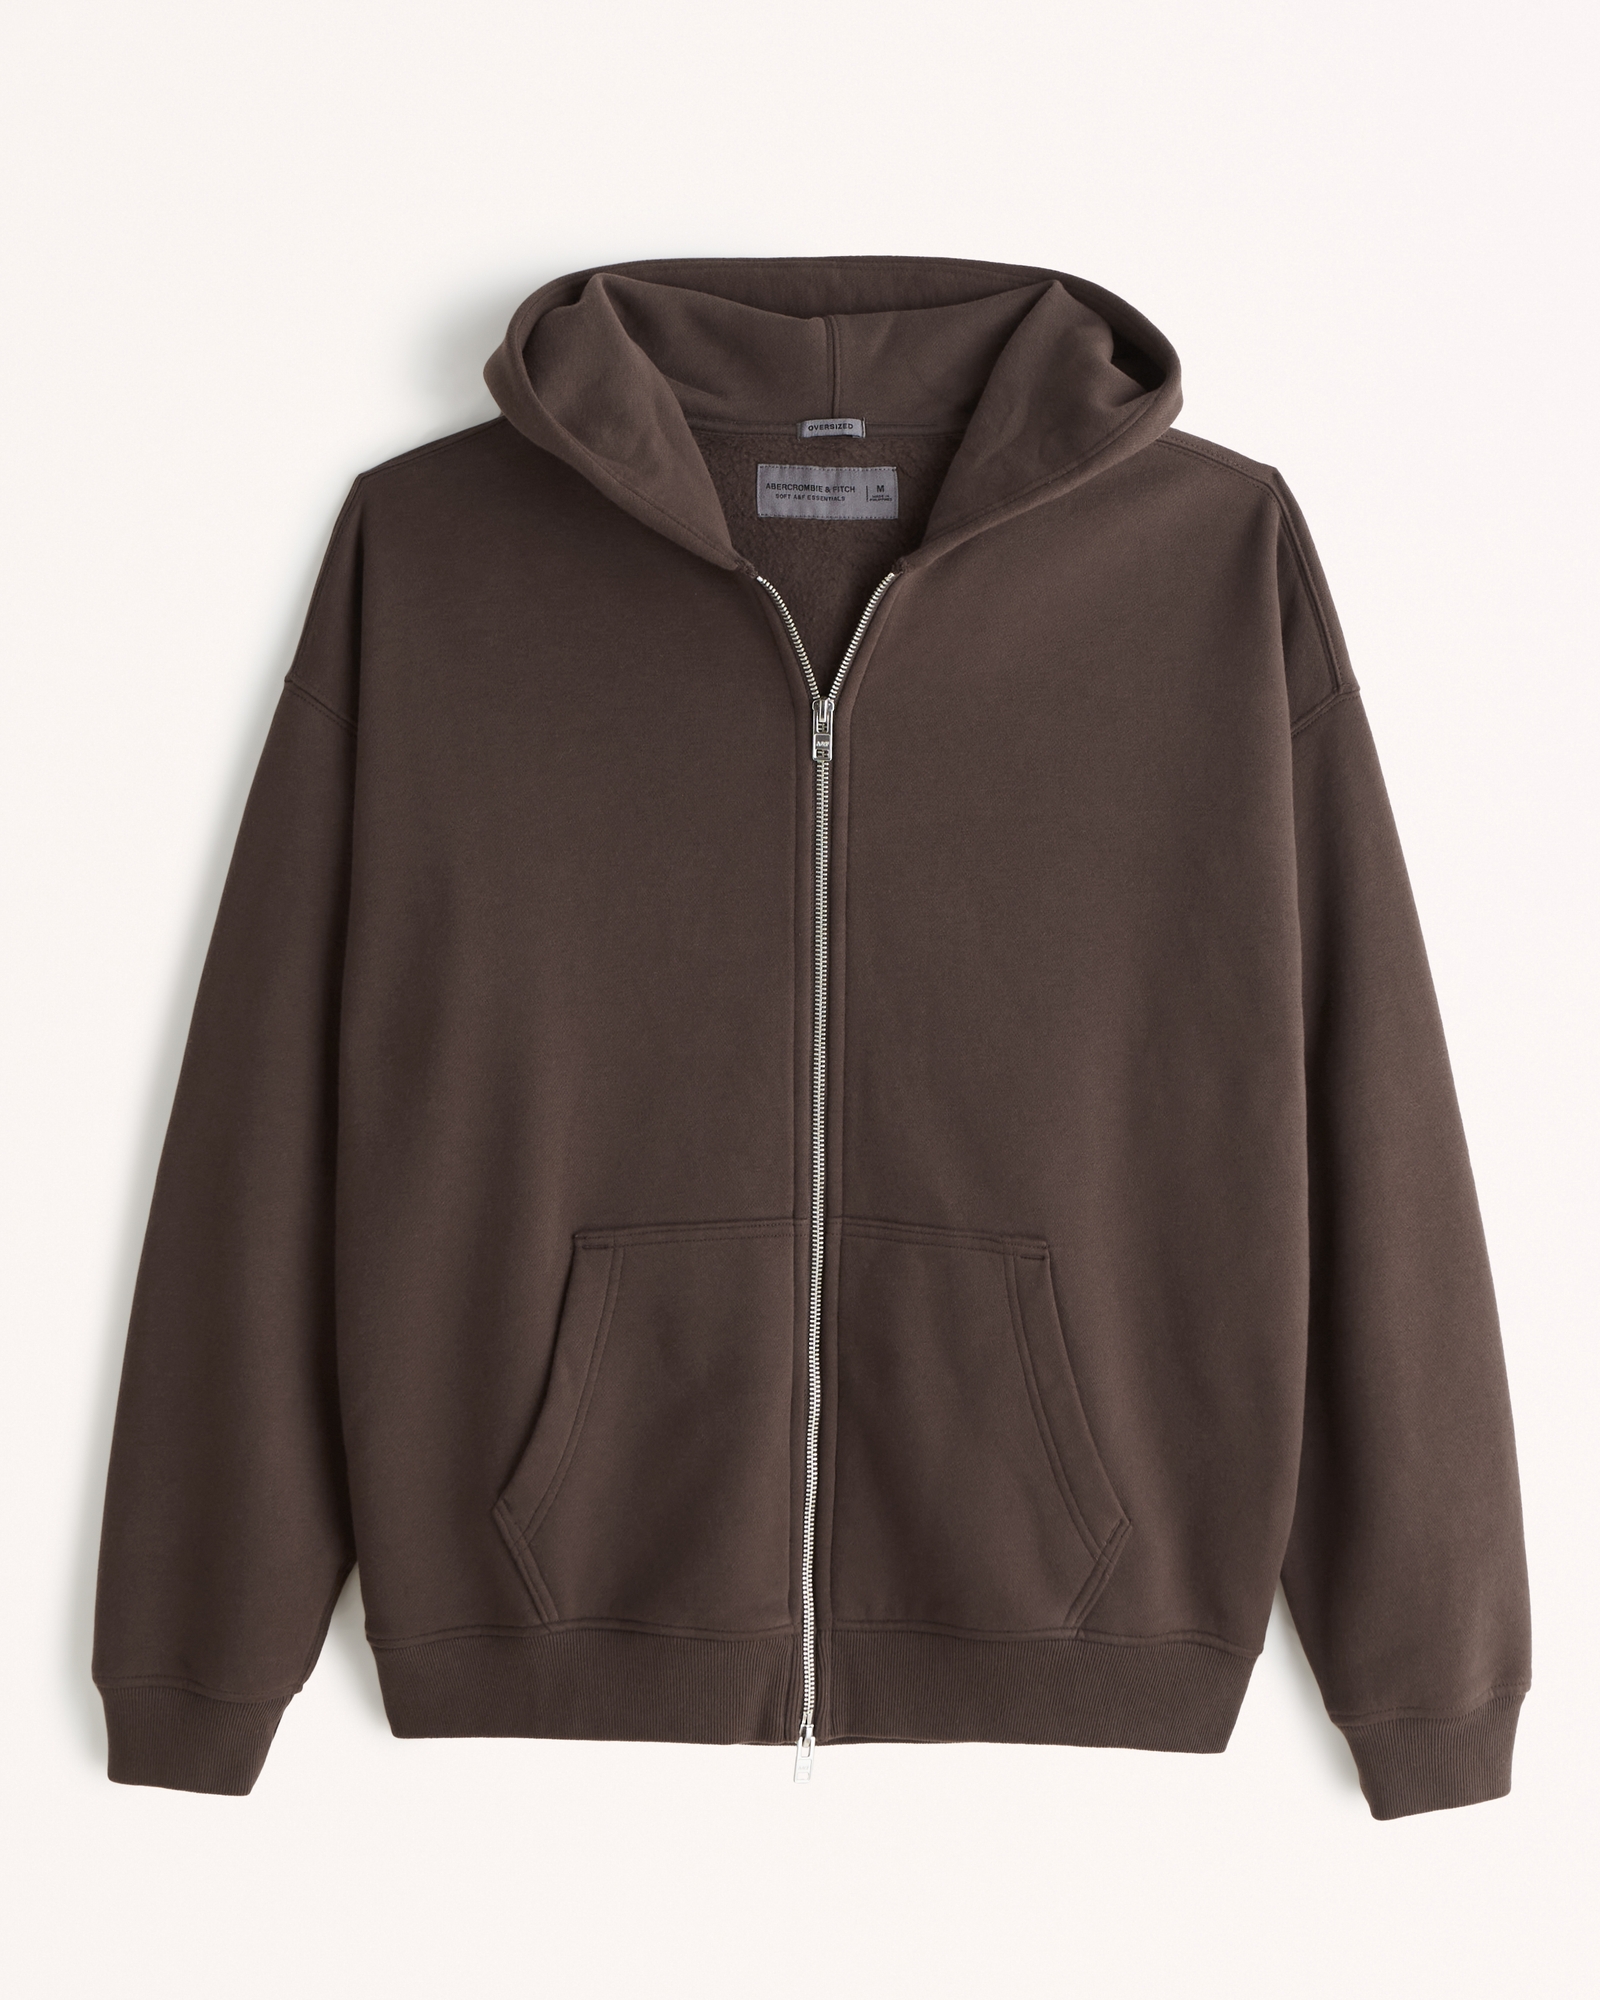 Hollister Gilly Hicks Active Boost Zip-up Jacket in Black